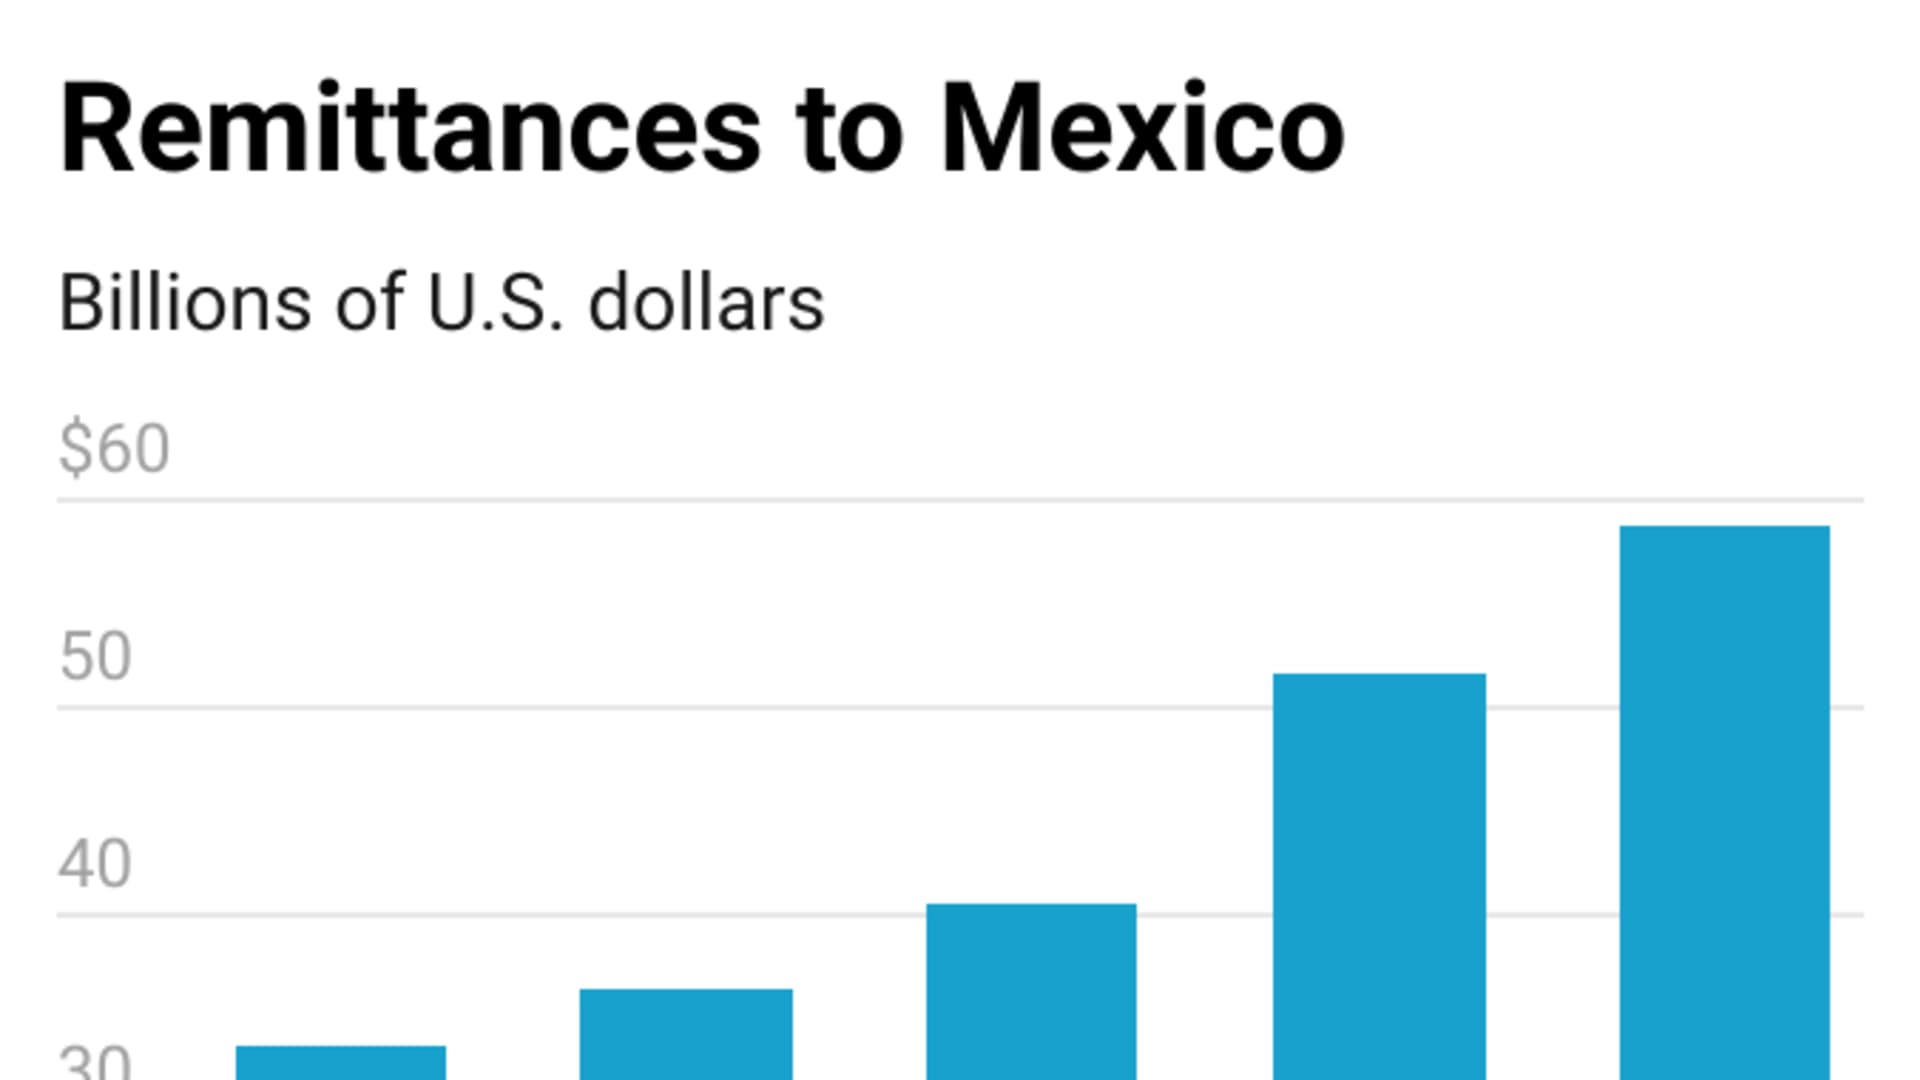 Remittances to Mexico